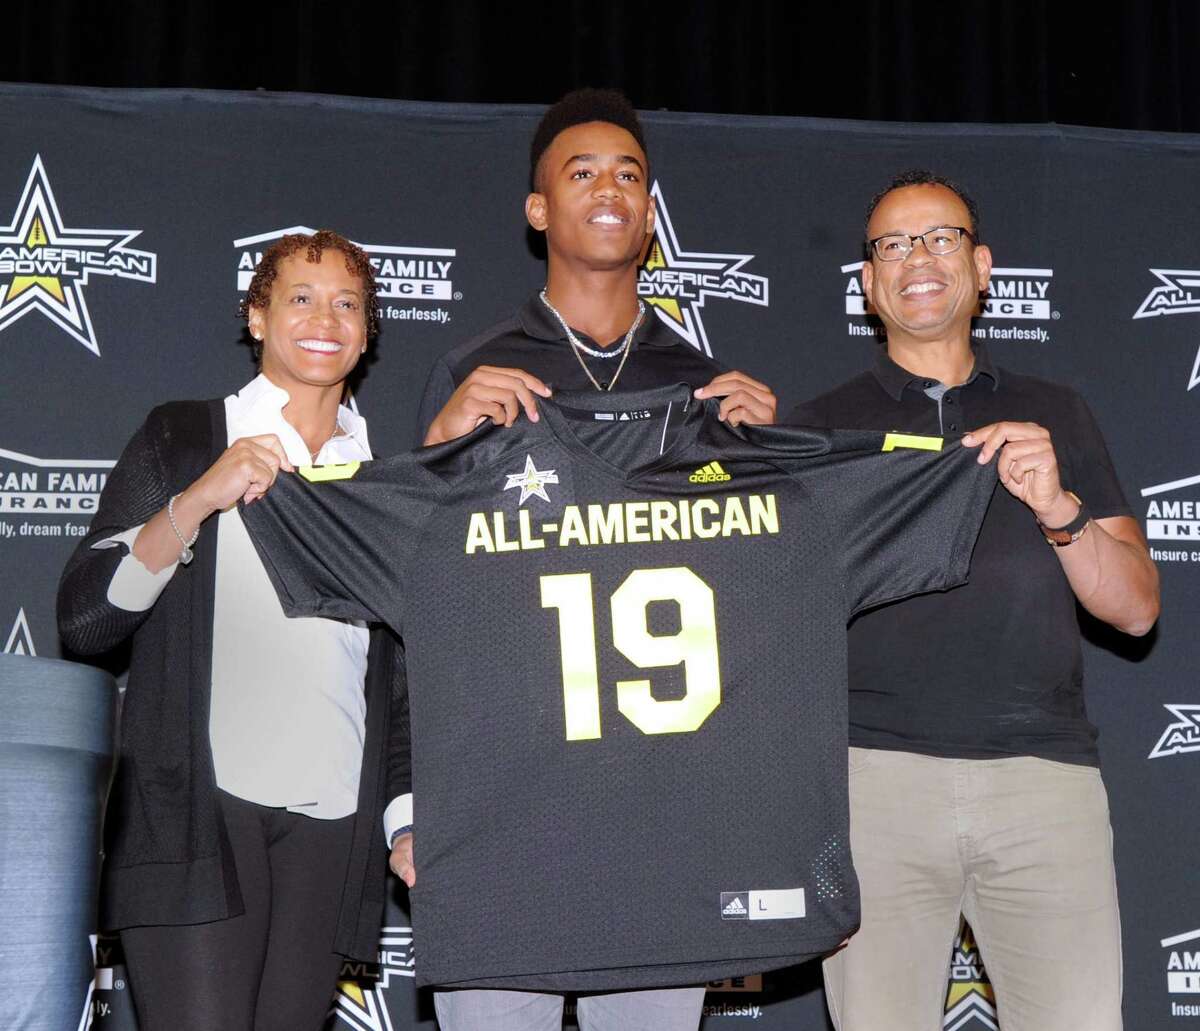 With his smiling parents, Dr.Cassandra Tribble, left, and Claude Johnson by his side, Brunswick School football player, Cornelius Johnson, center, a wide receiver, holds his All-American football jersey from the organizers of the national All-American Bowl by American Family Insurance during a presentation ceremony at Brunswick School where Johnson plays and is a senior, Greenwich, Conn., Tuesday, Oct. 16, 2018. The bowl game Johnson will play in will be played in San Antonio, Texas, on January 5, 2019.